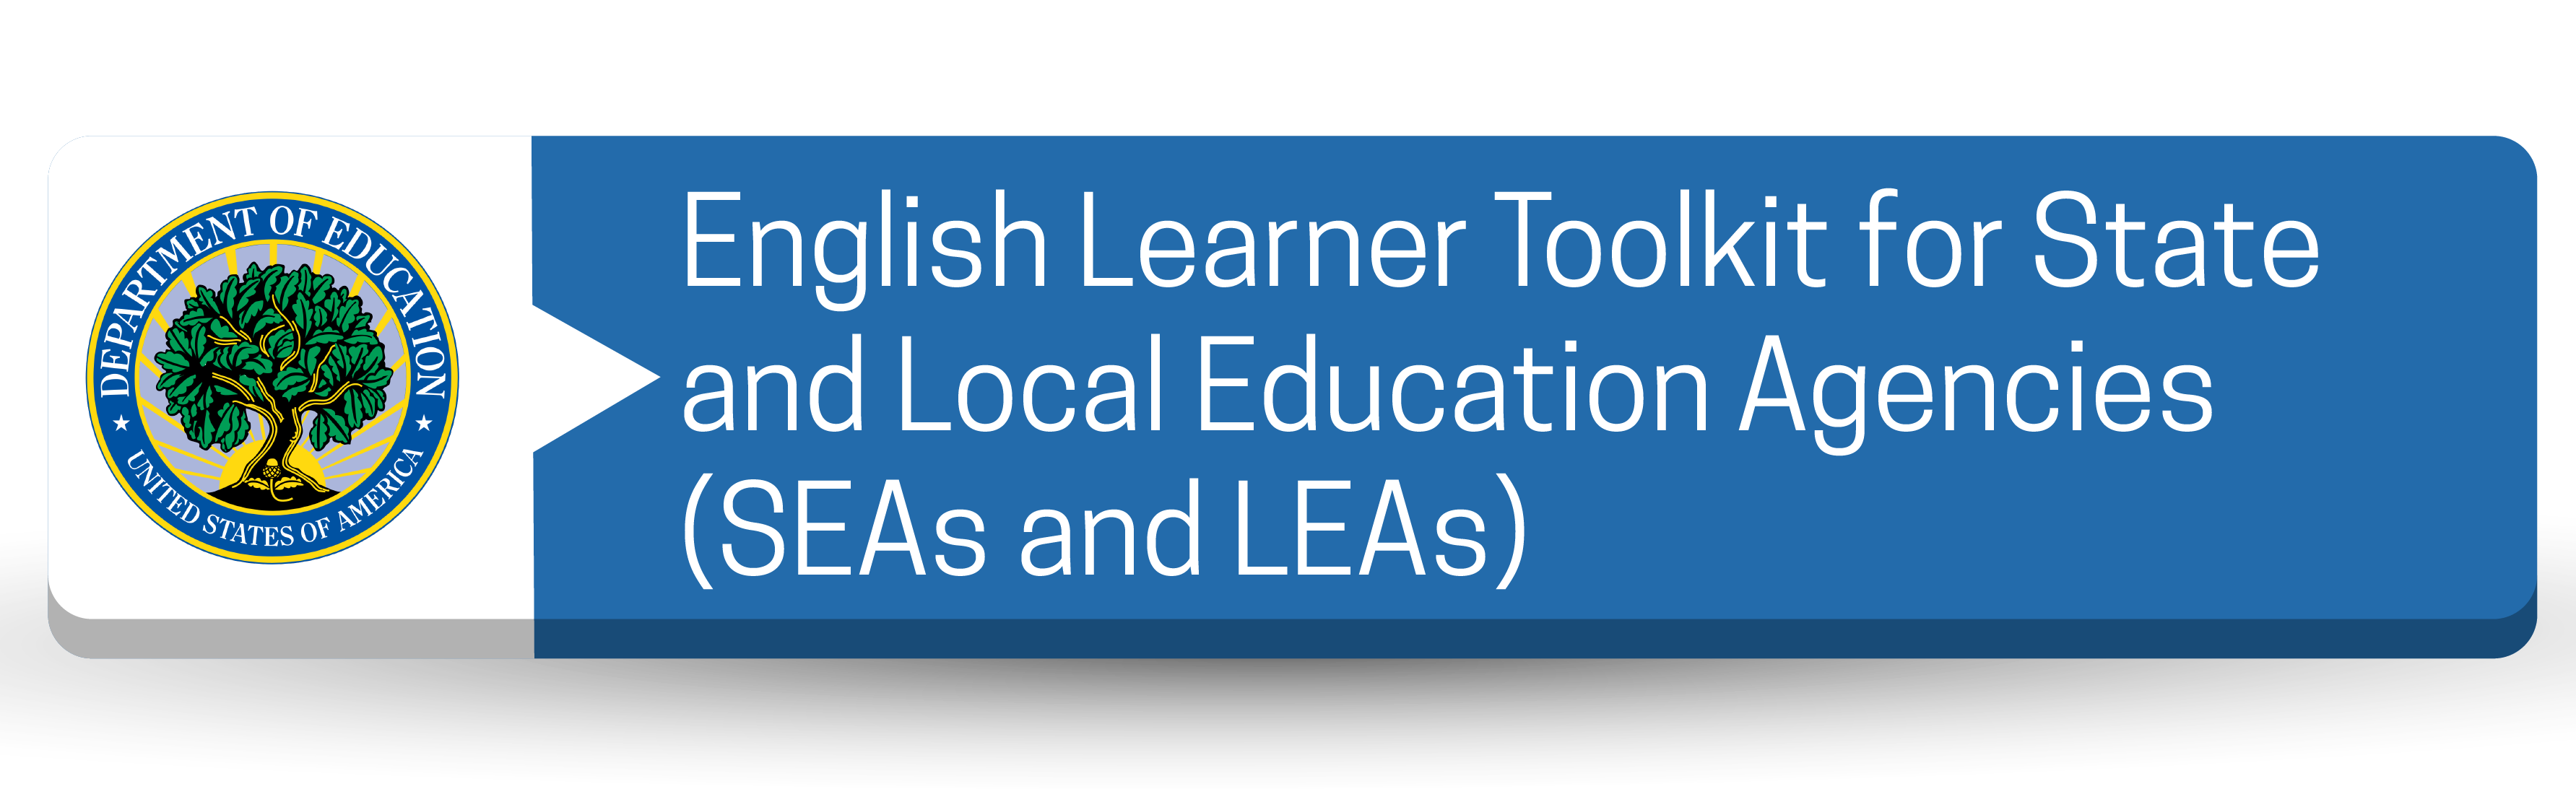 English Learner Toolkit for State and Local Education Agencies (SEAs and LEAs) Button